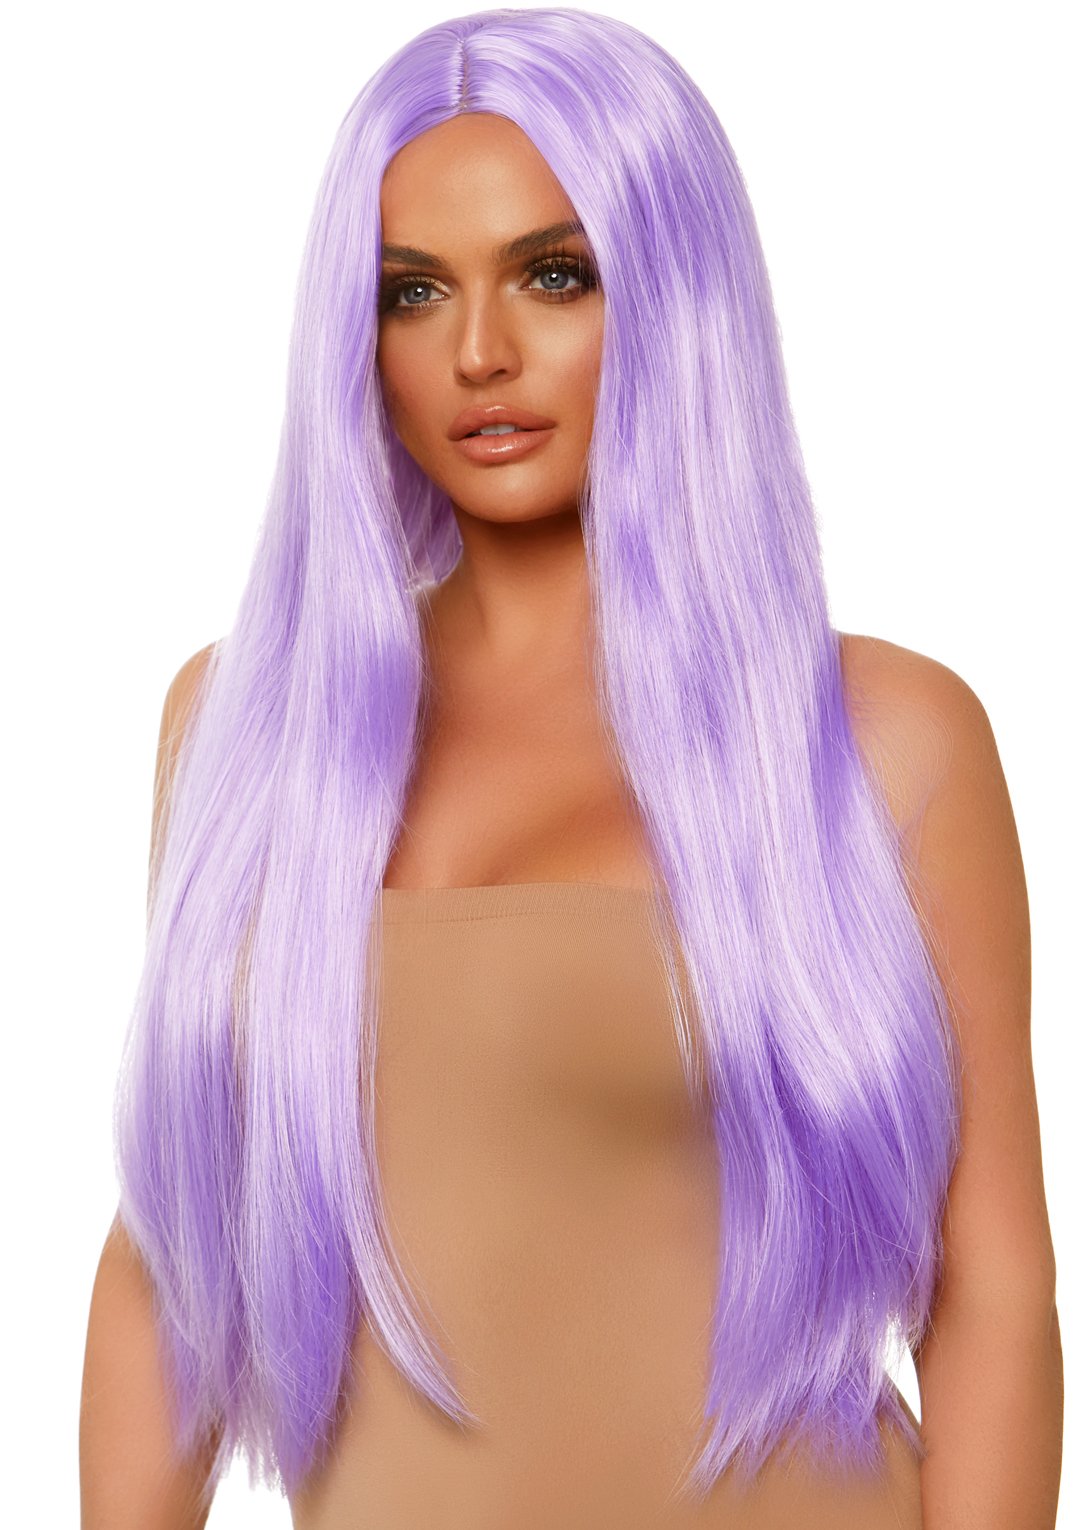 Long Straight Wig 33 Inch in Lavender